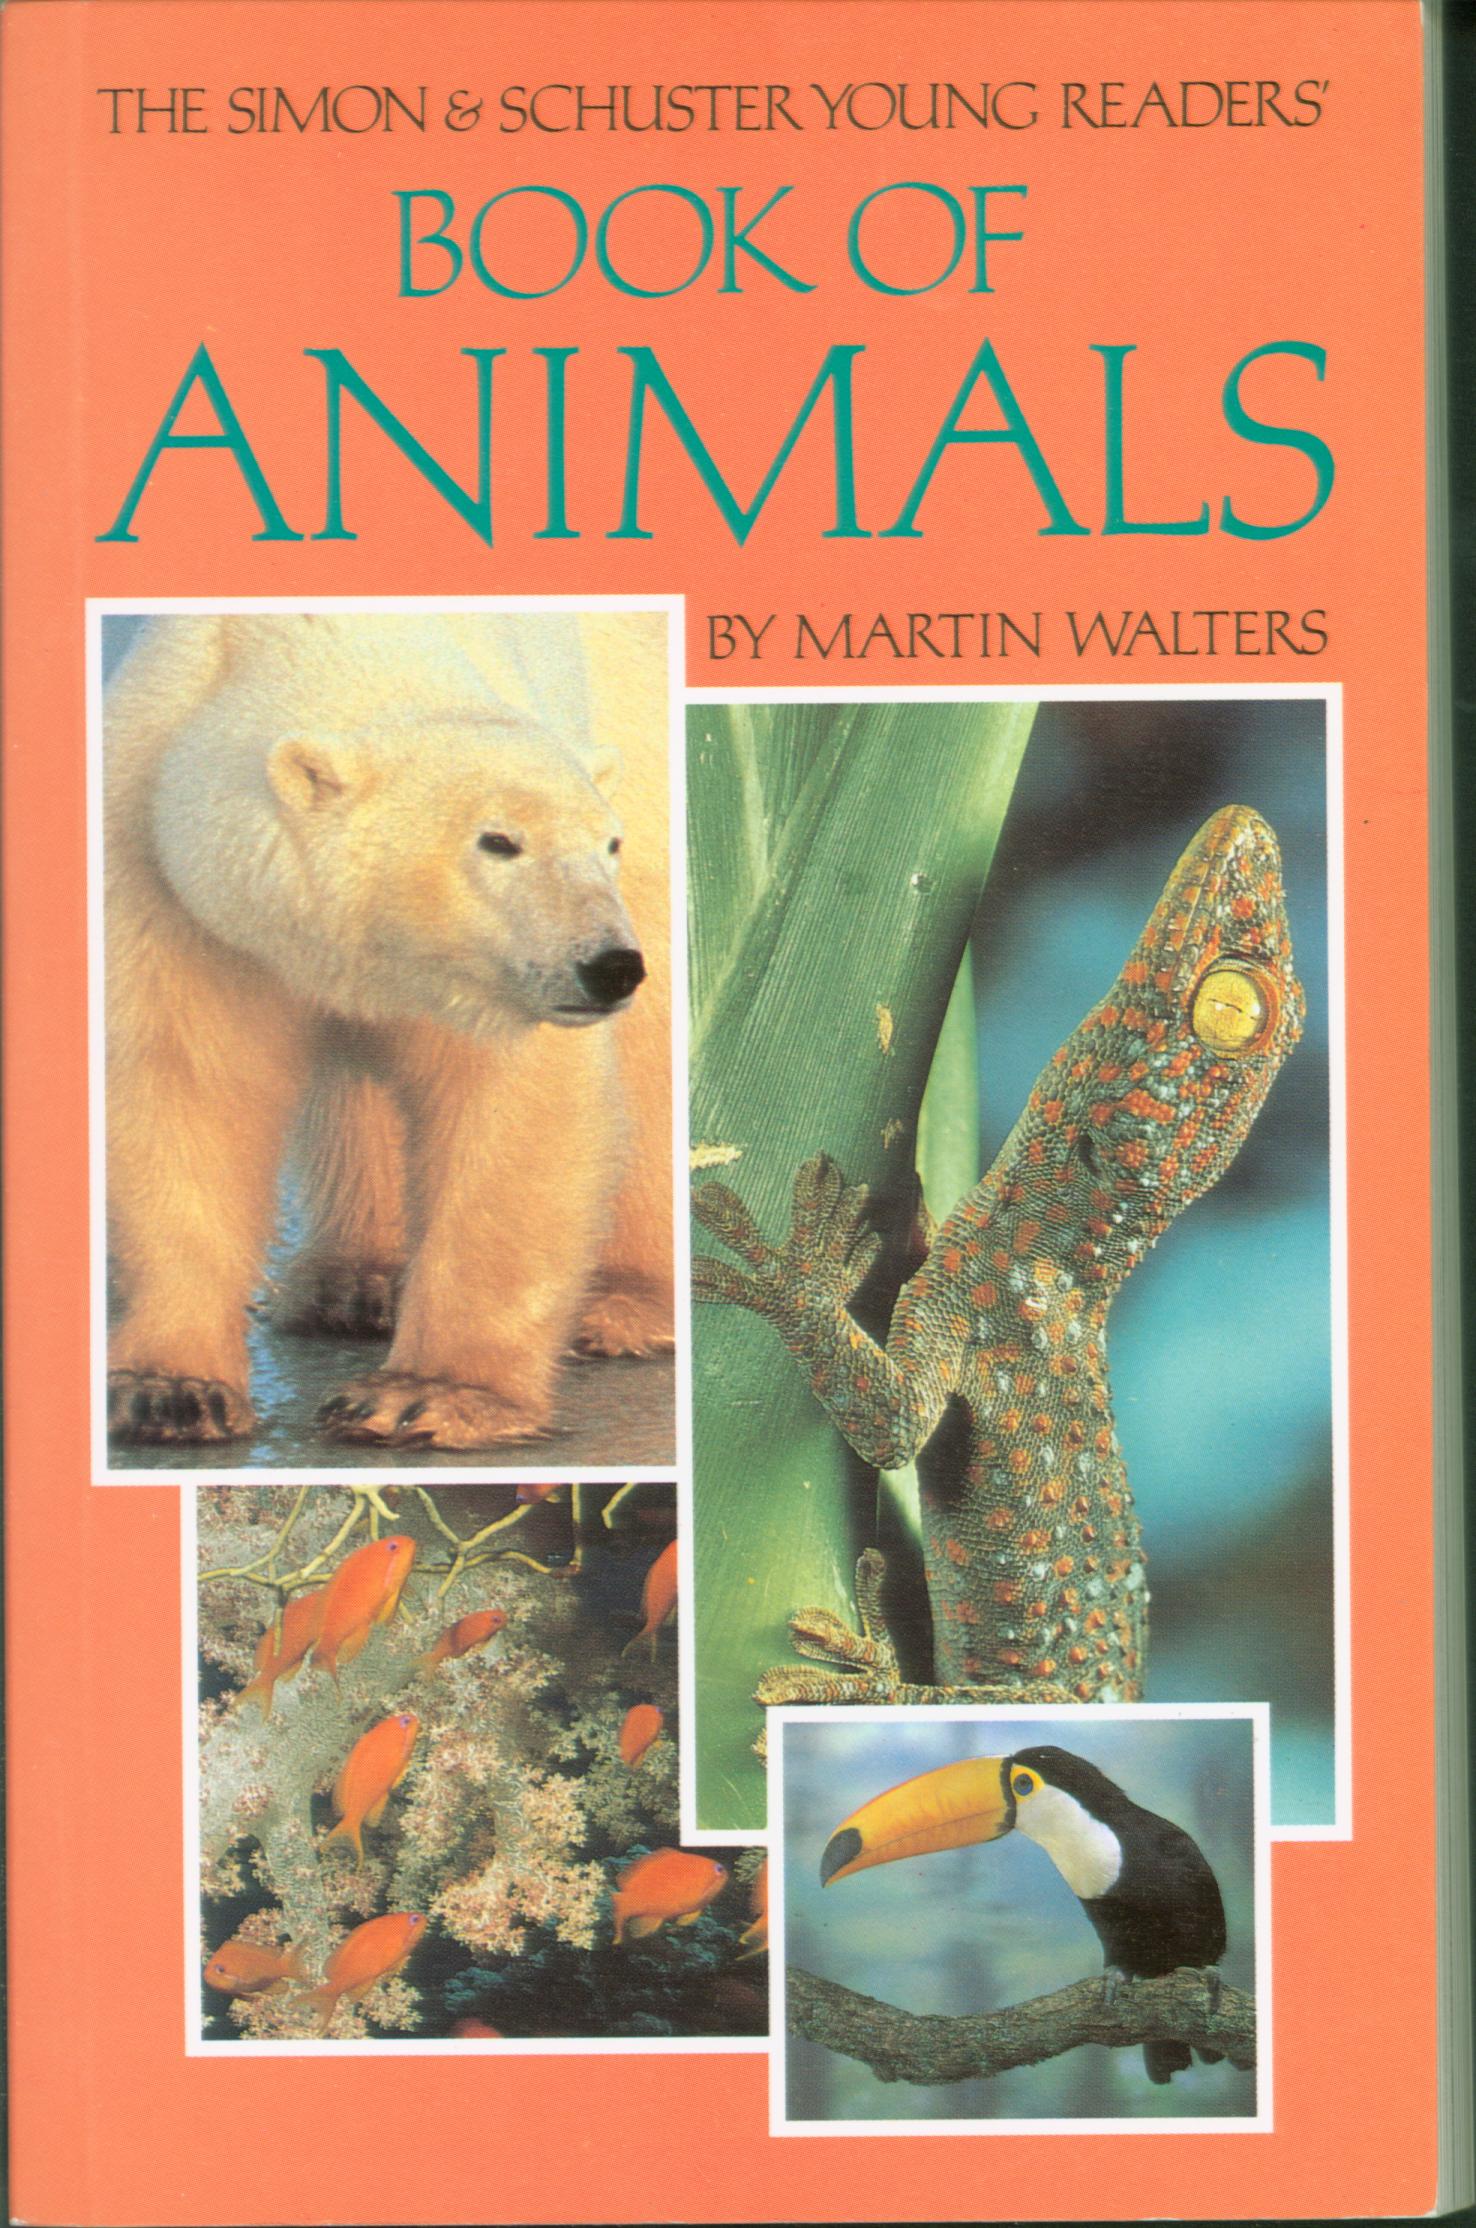 BOOK OF ANIMALS (THE SIMON & SCHUSTER YOUNG READERS').